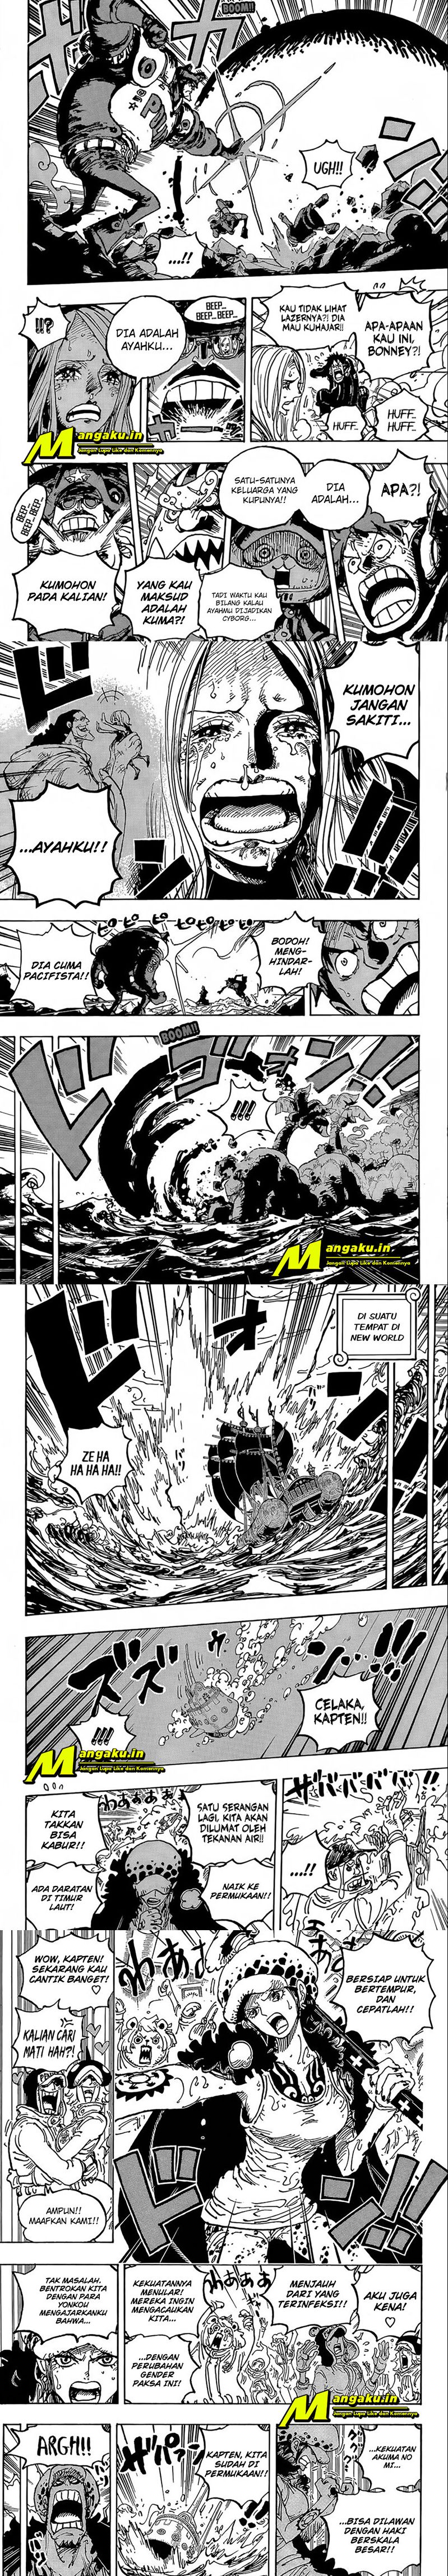 One Piece Chapter 1063 hq